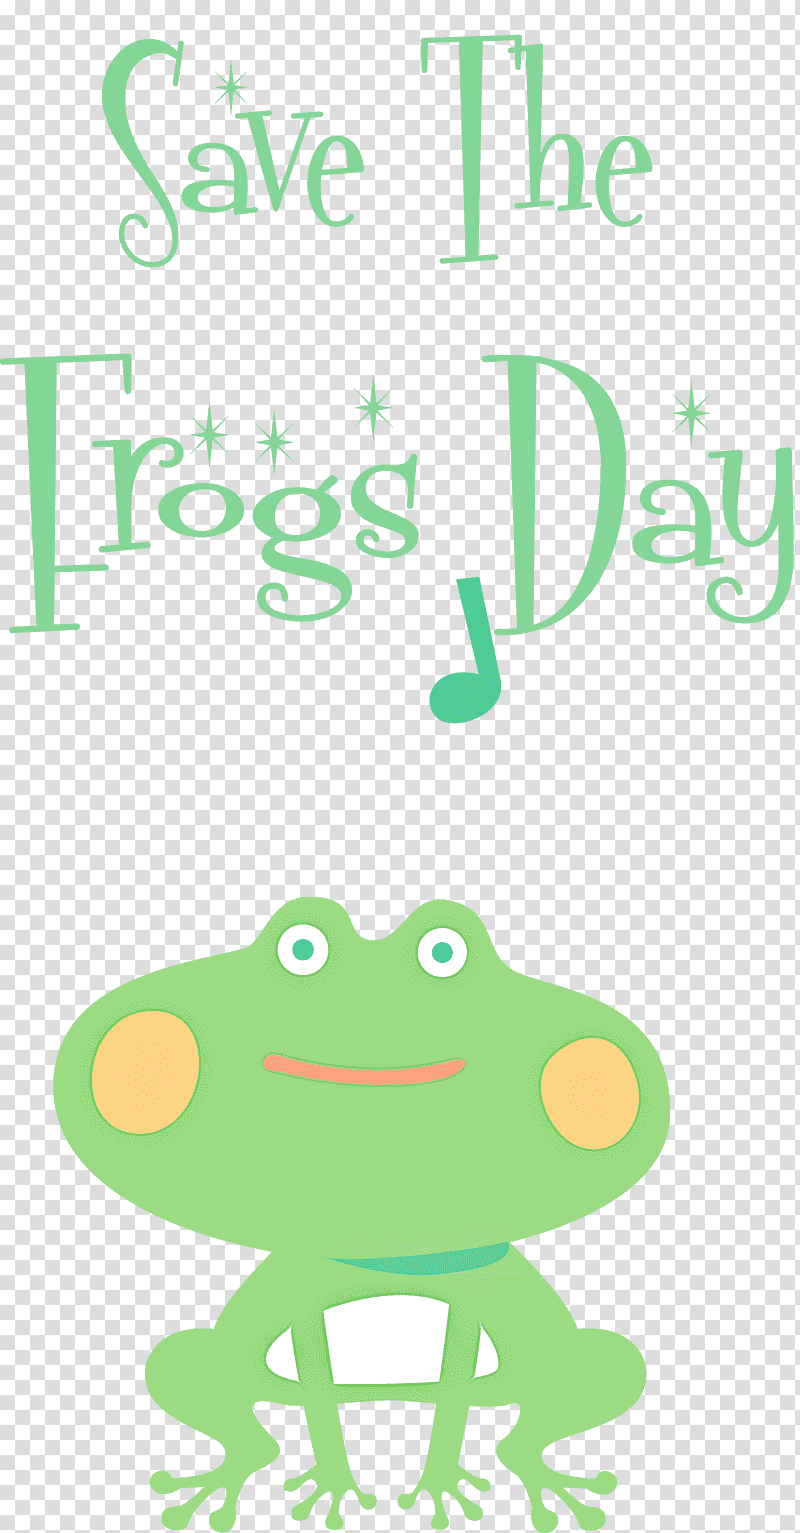 Save The Frogs Day World Frog Day, Tree Frog, Cartoon, Green, Nail Polish, Text transparent background PNG clipart